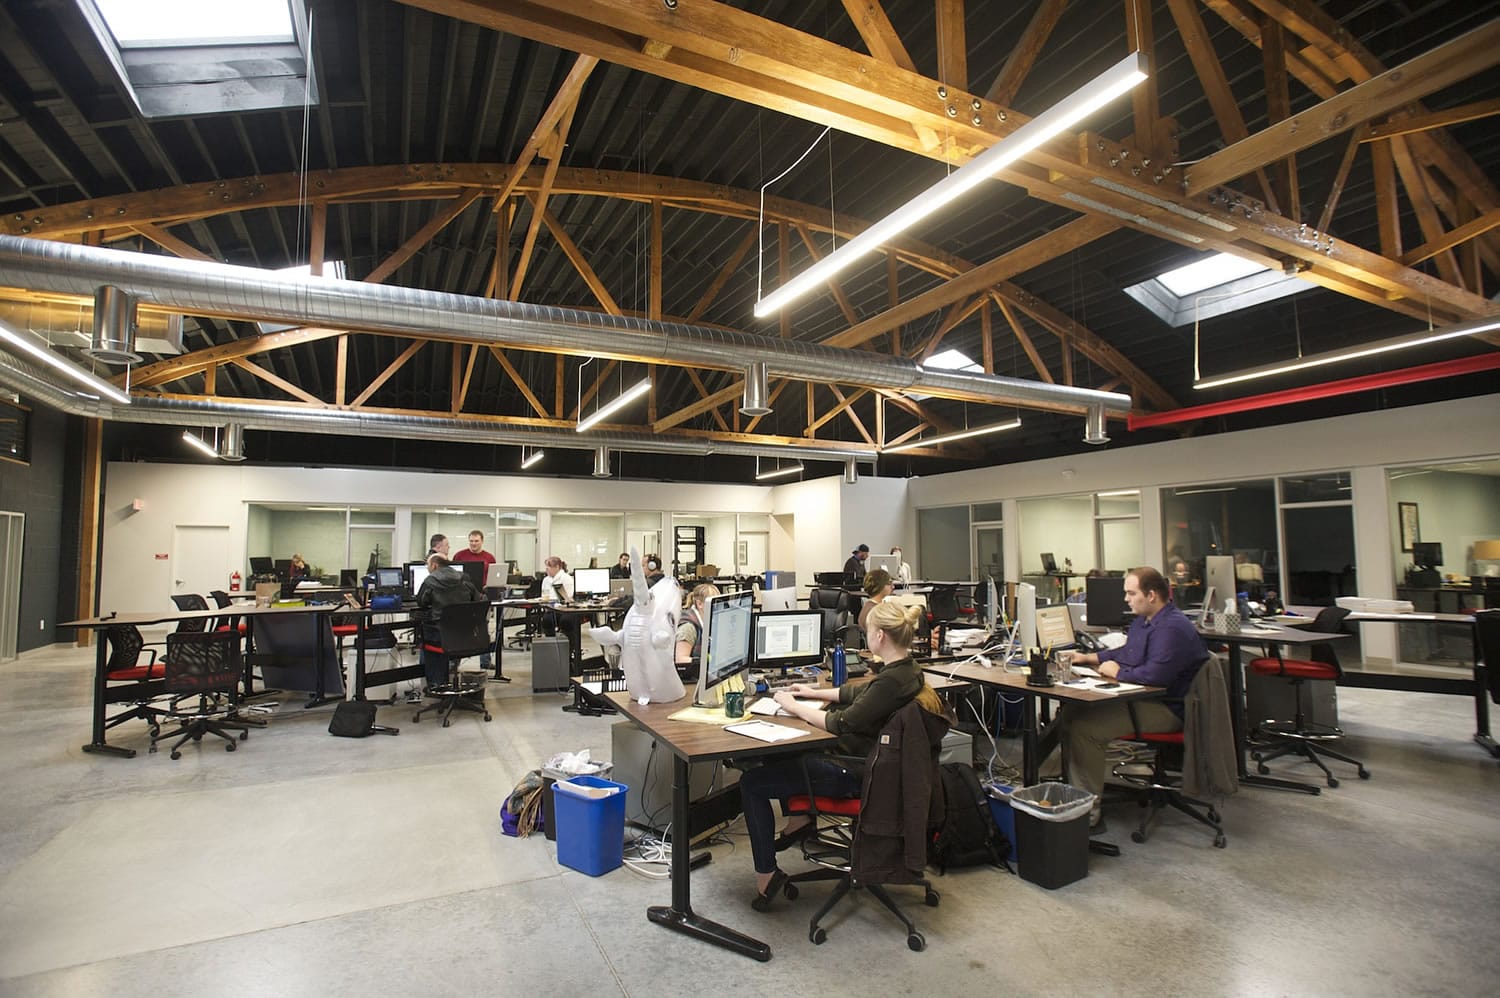 Fuel Medical has retained an open work space and refinished trusses and wood beams in an old Westlie Ford building in downtown Camas.